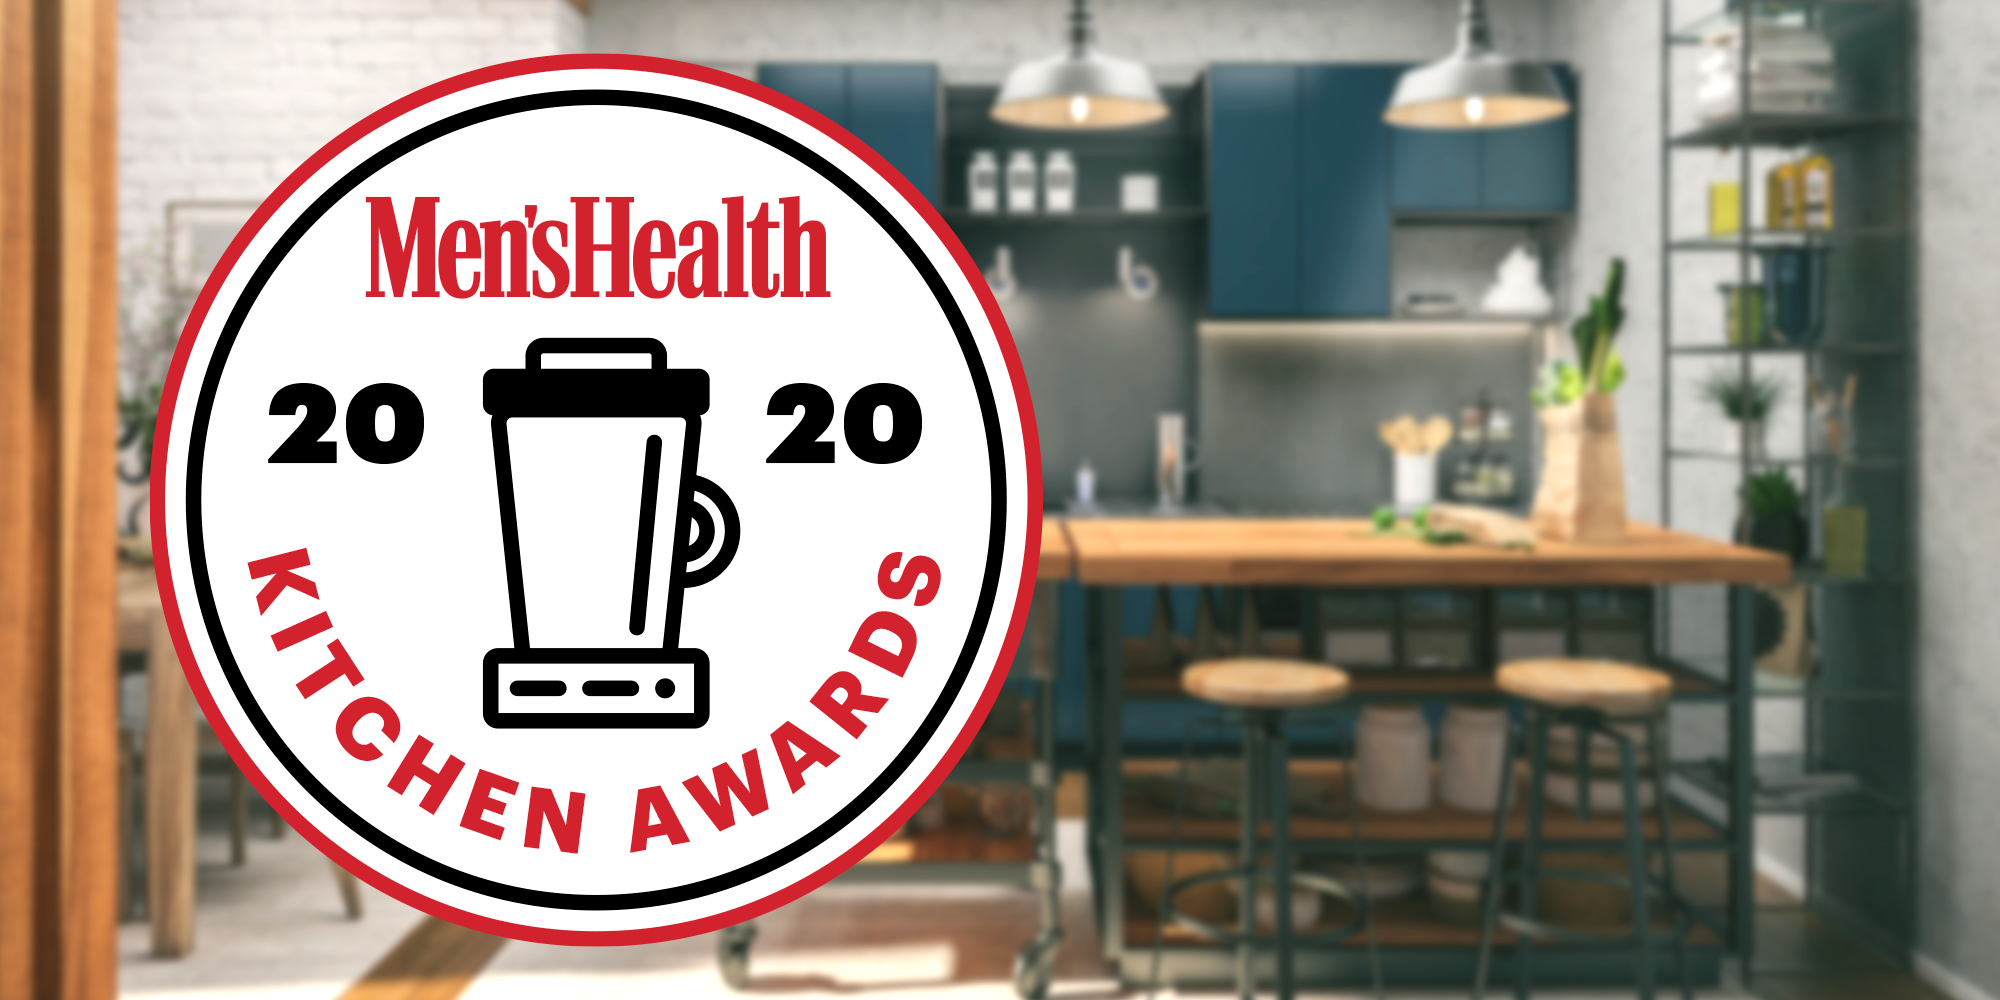 Men's Health Kitchen Awards 2019 - 30 Tools Every Cook Needs